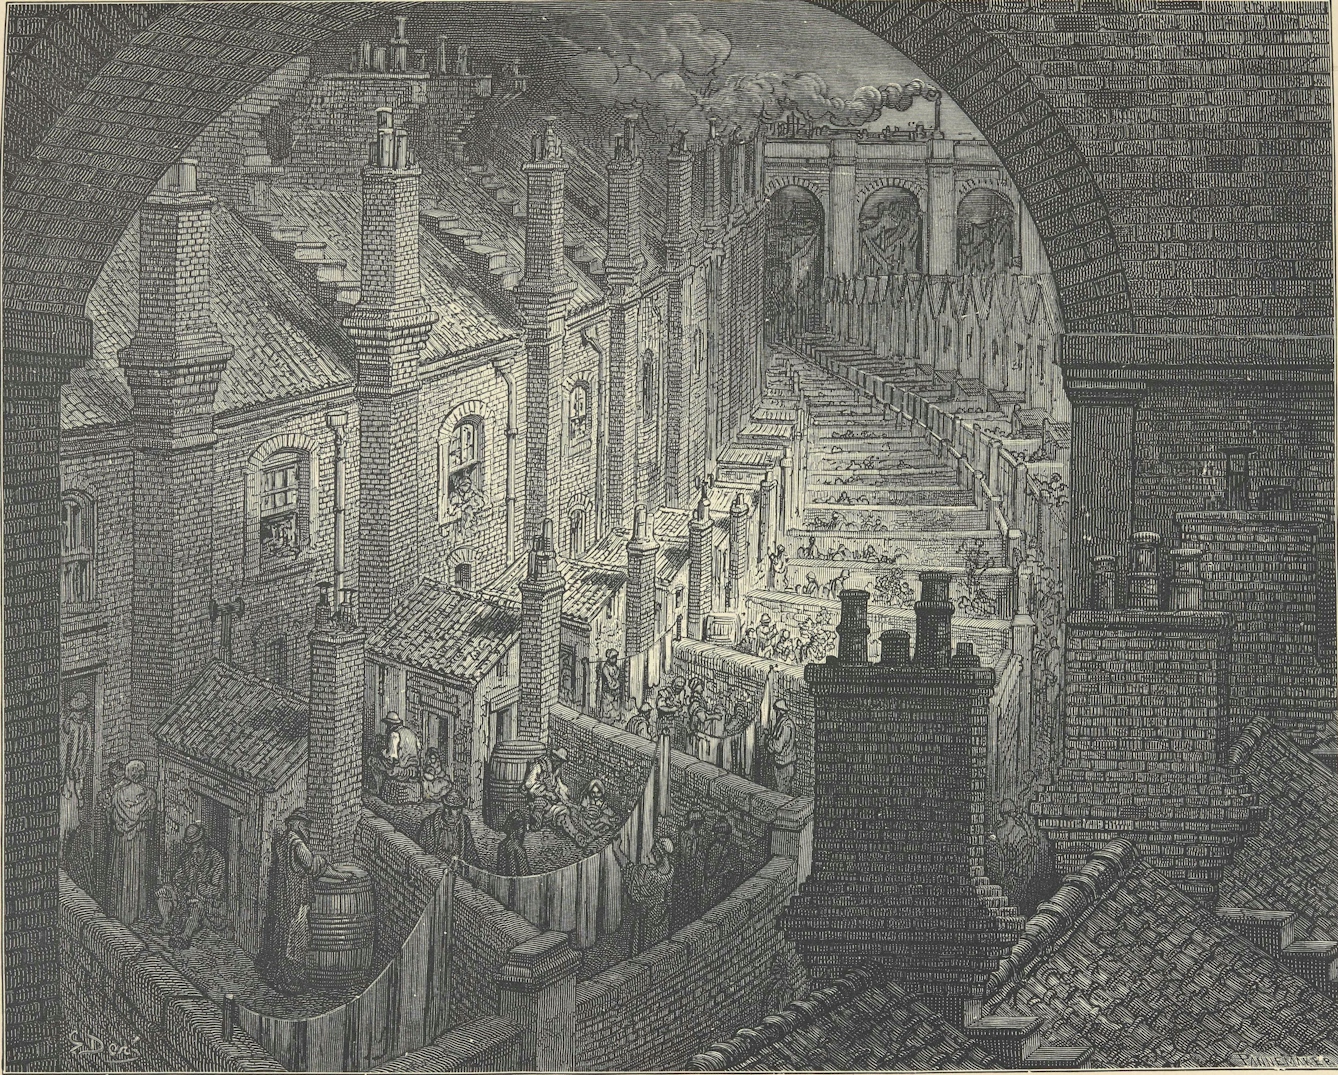 A black-and-white illustration of London gardens from the 1870s from the view of a train passing by